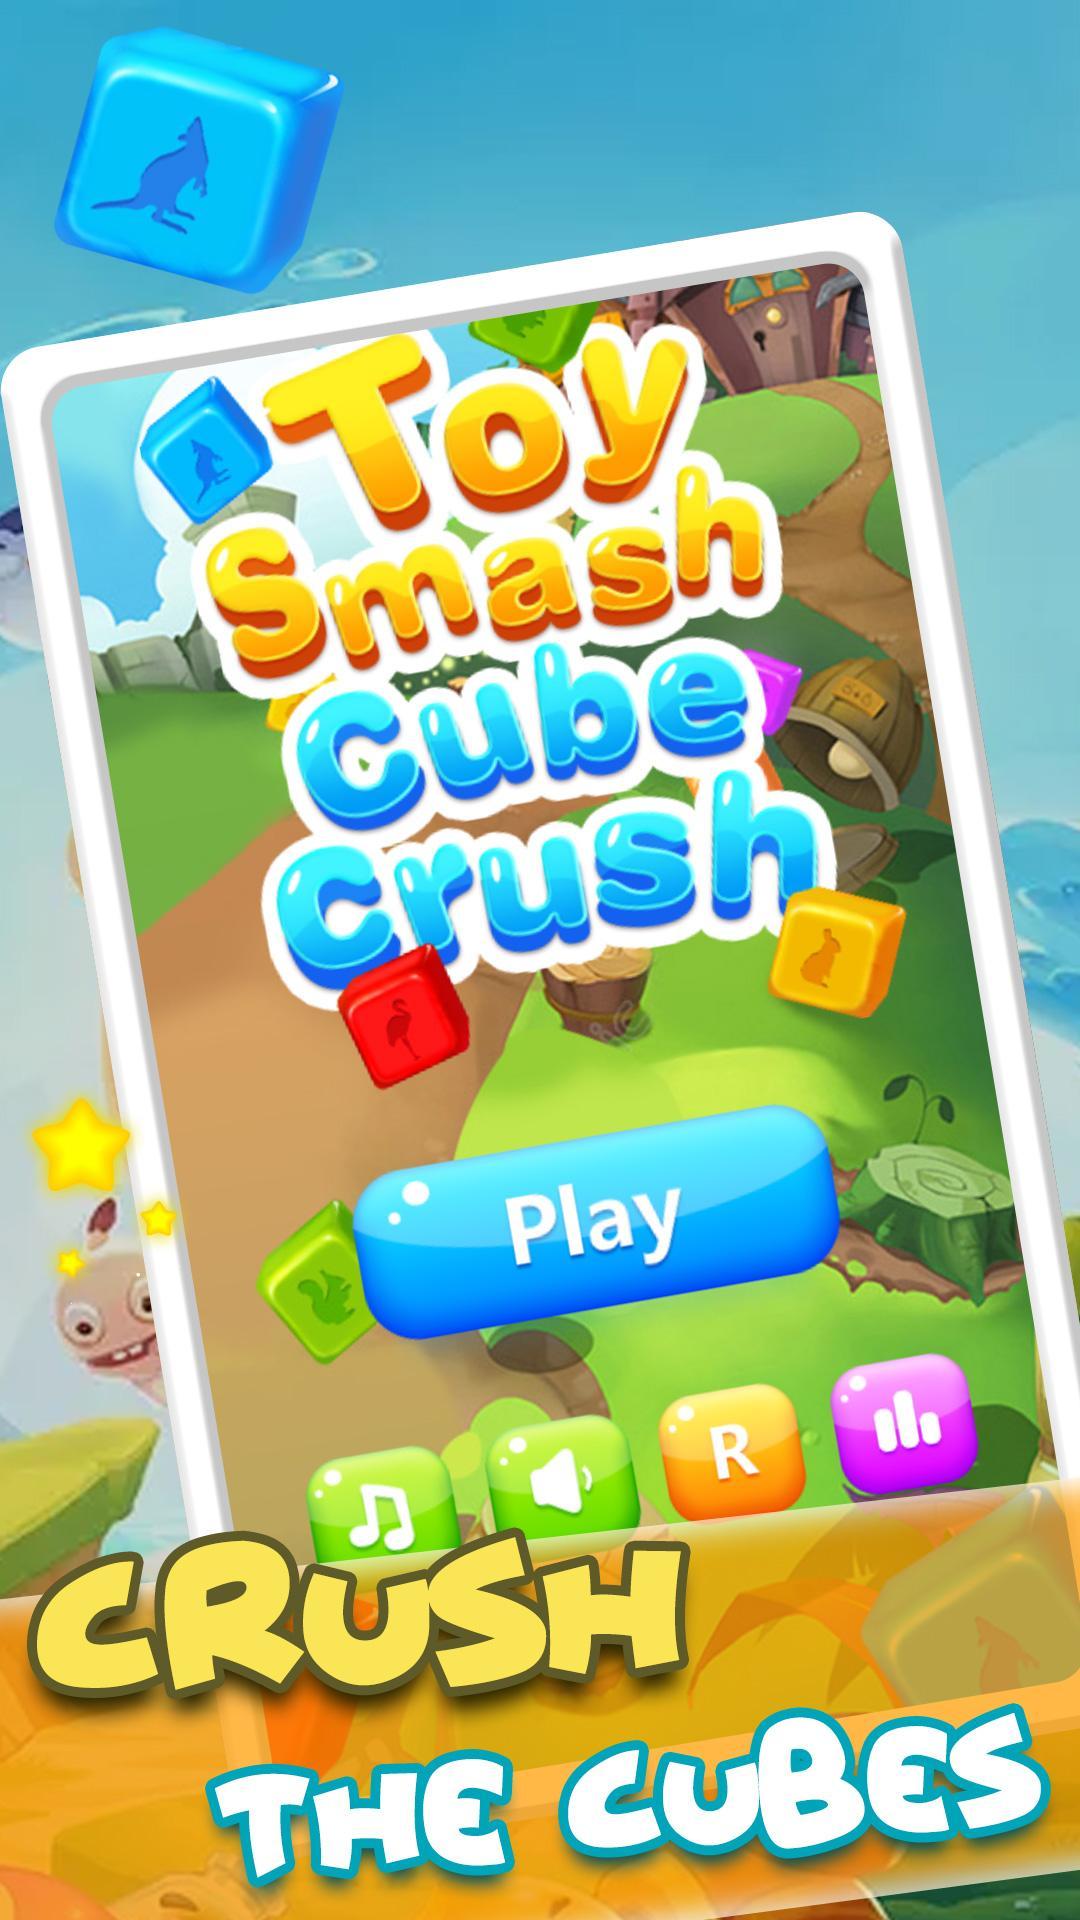 Screenshot 1 of Spielzeugexplosion: Cube Smash 1.0.2